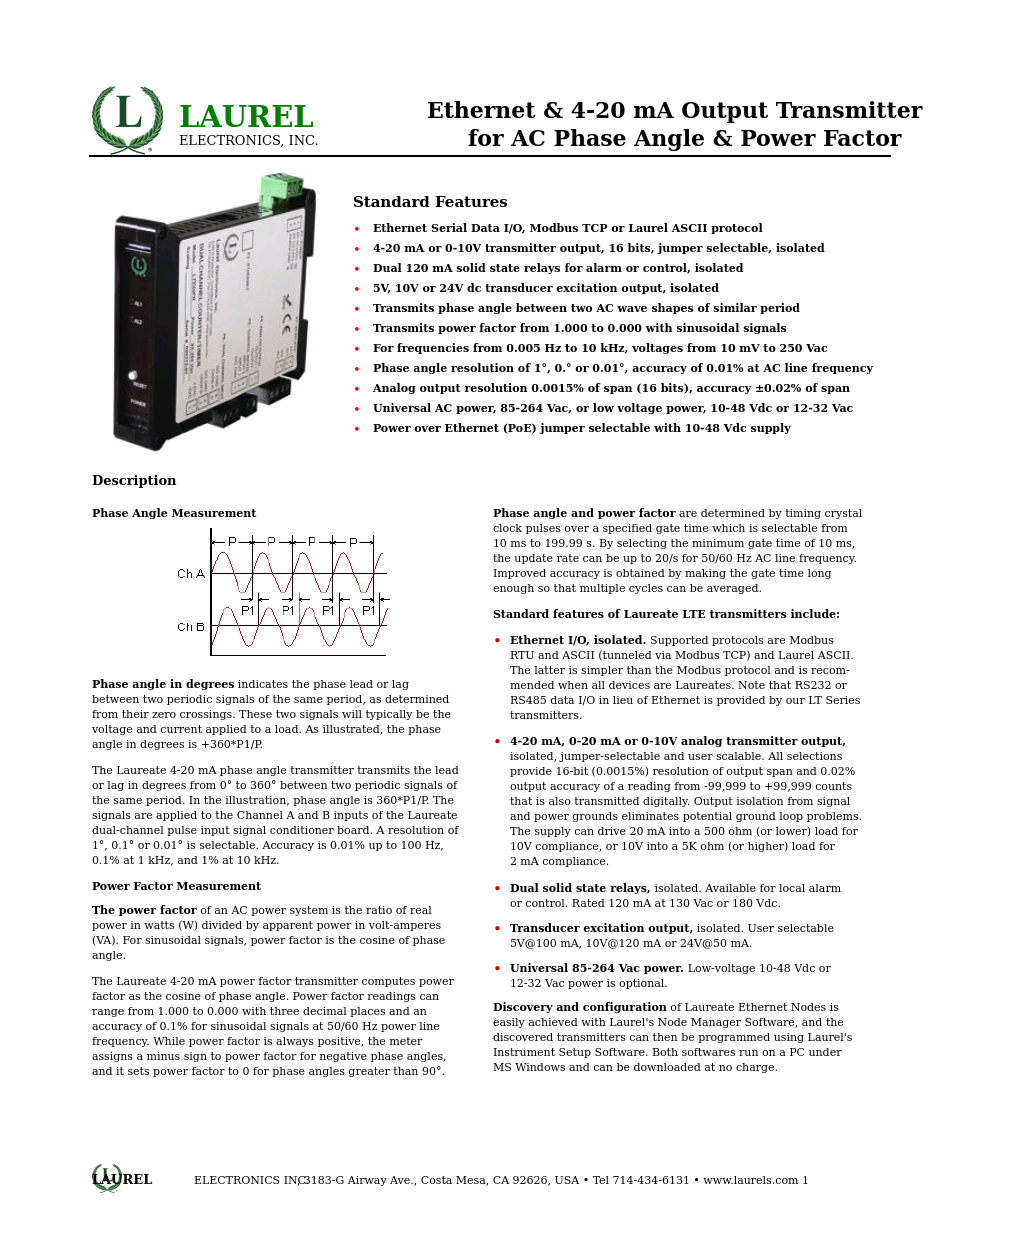 LTE: Ethernet & 4-20 mA Output Transmitter for AC Phase Angle & Power Factor